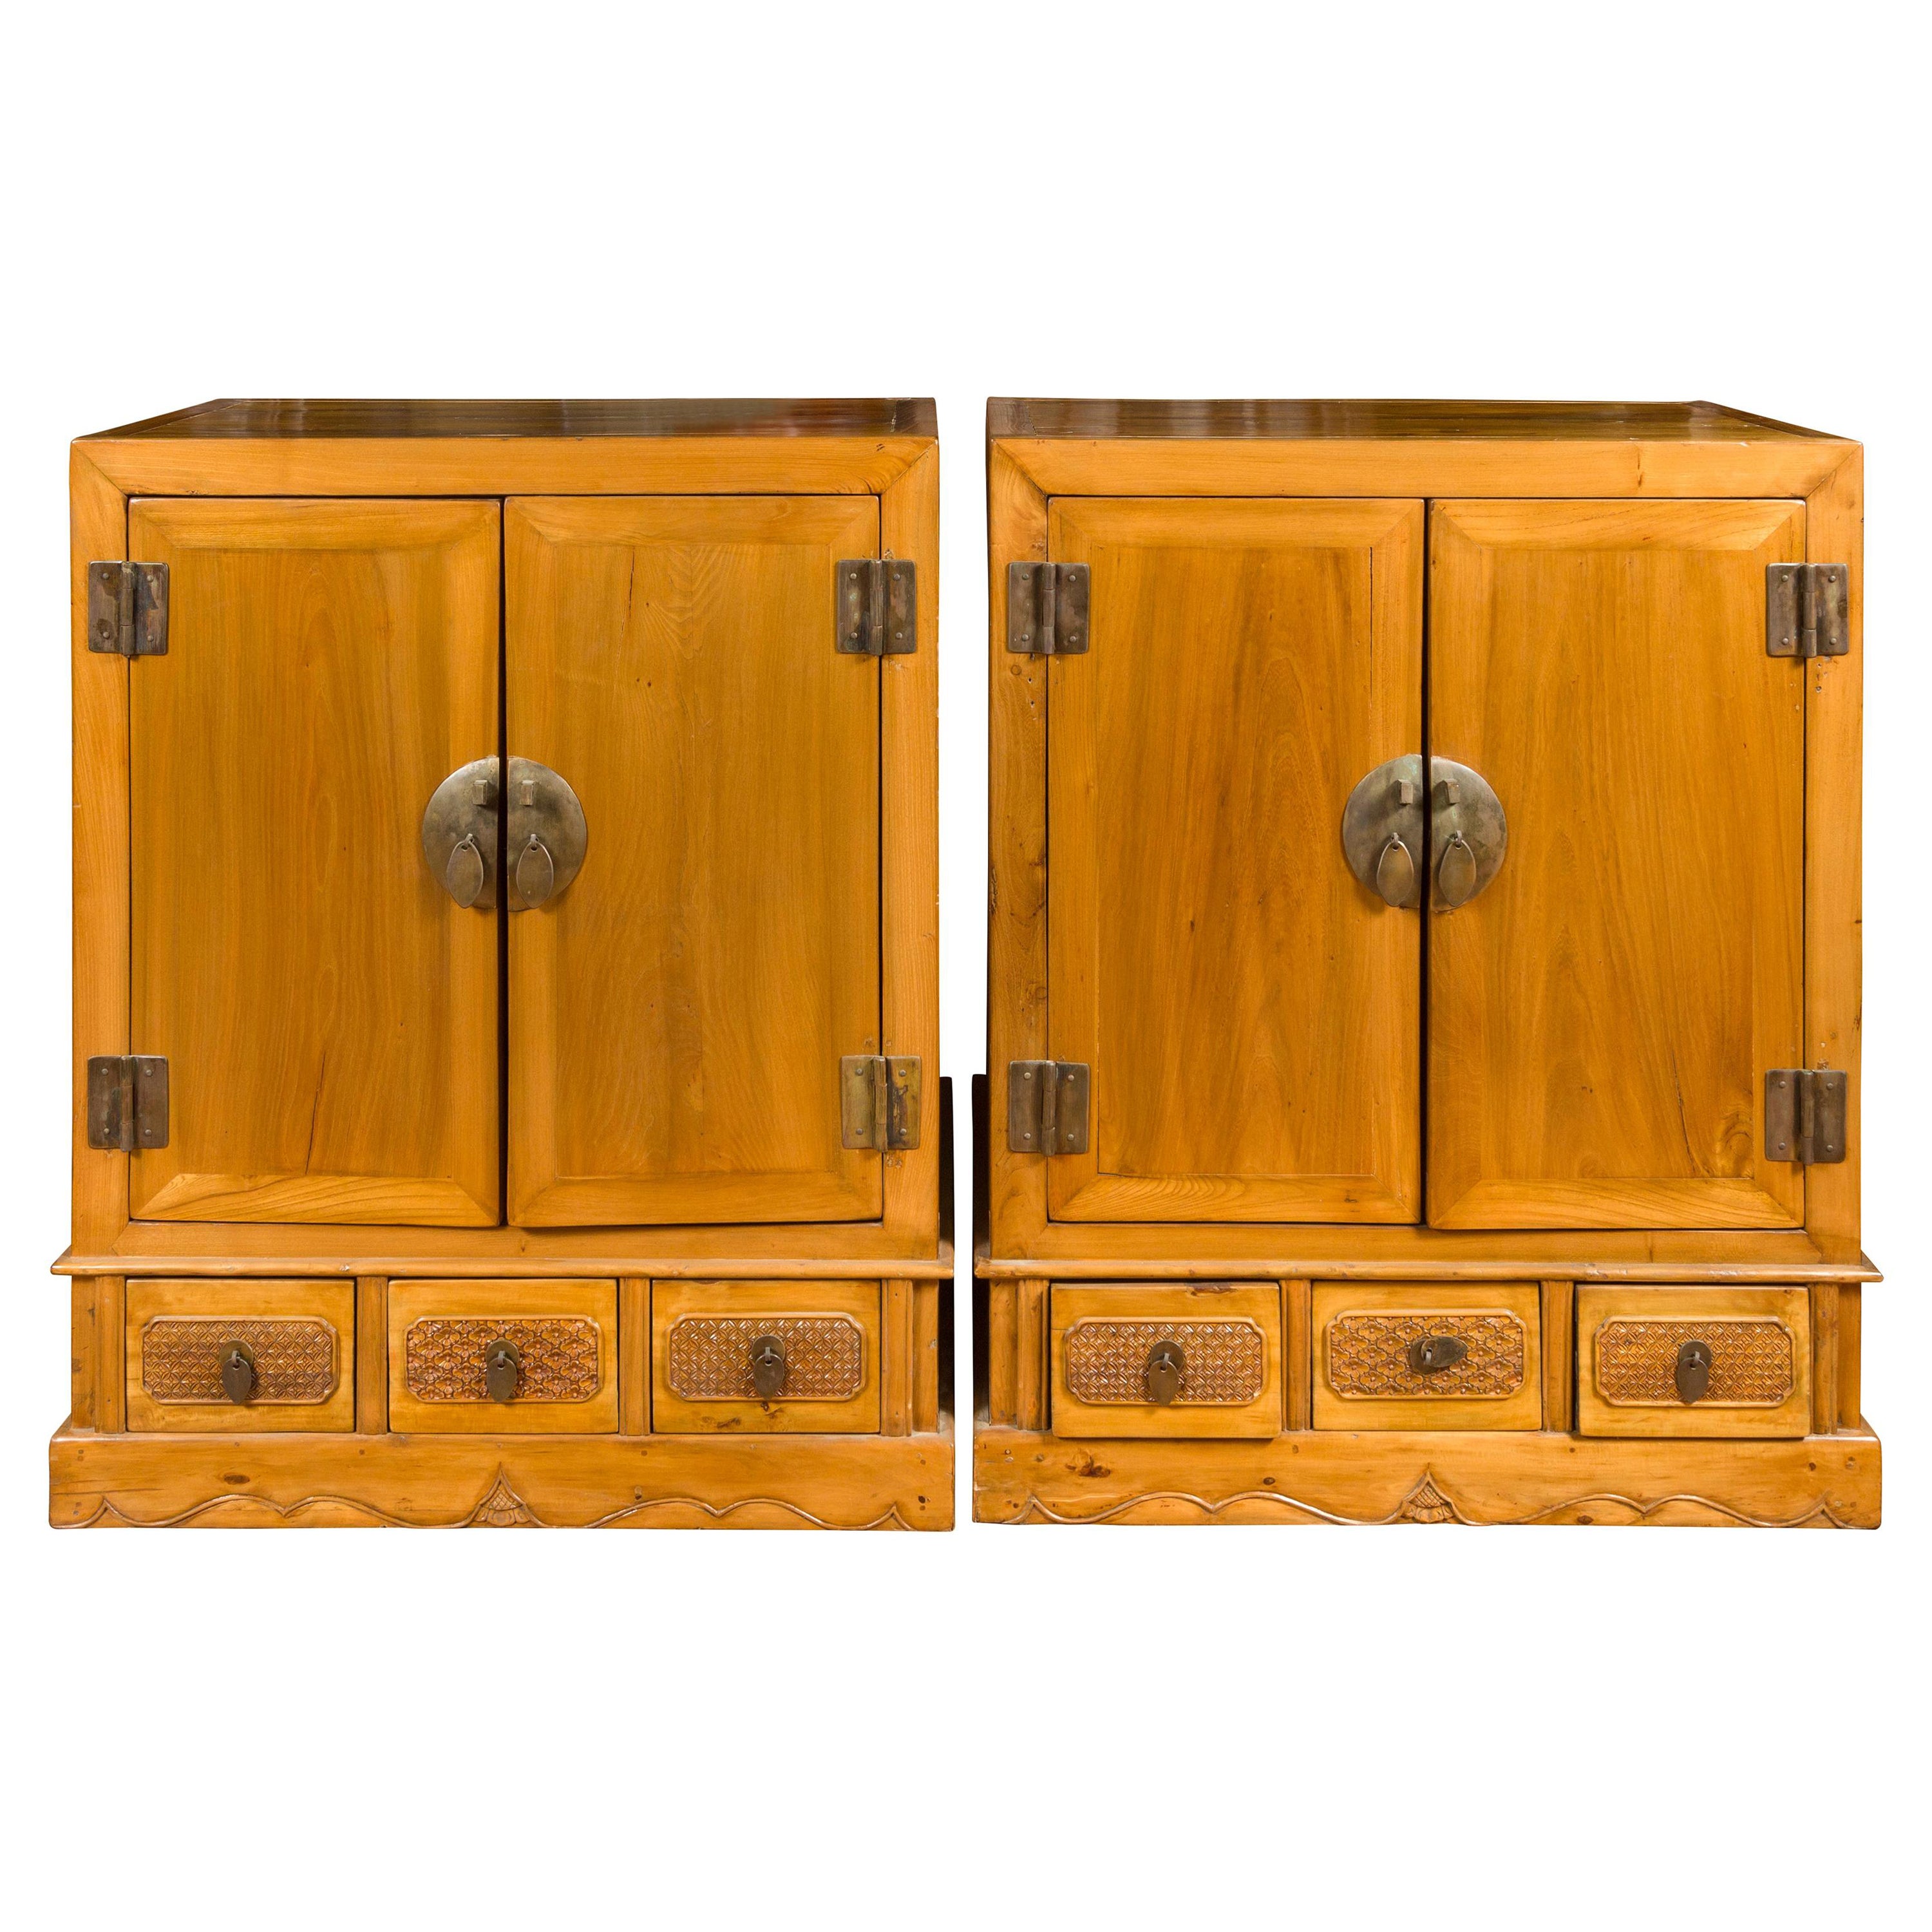 Pair of Chinese Qing Dynasty Carved Yumu Wood Cabinets with Doors and Drawers For Sale